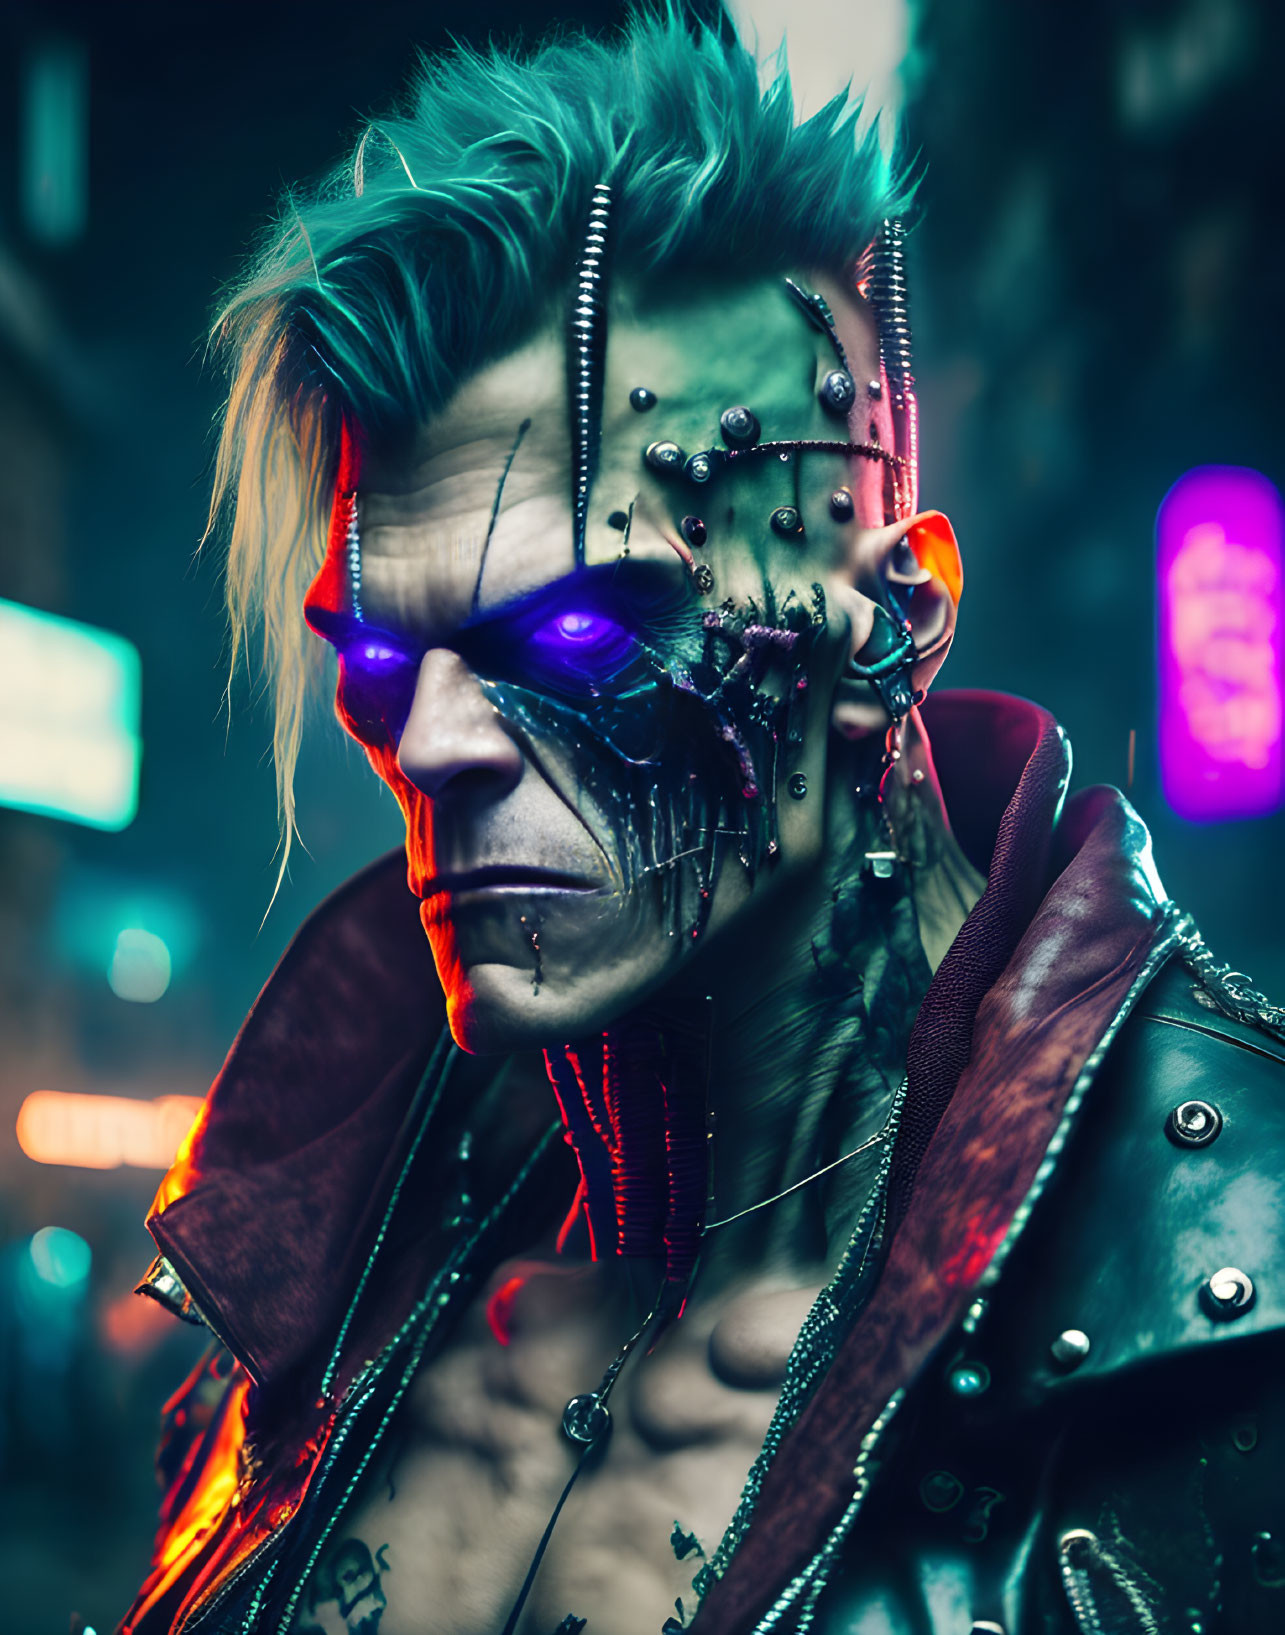 Cyberpunk-inspired individual with neon-lit glasses, piercings, and mohawk in